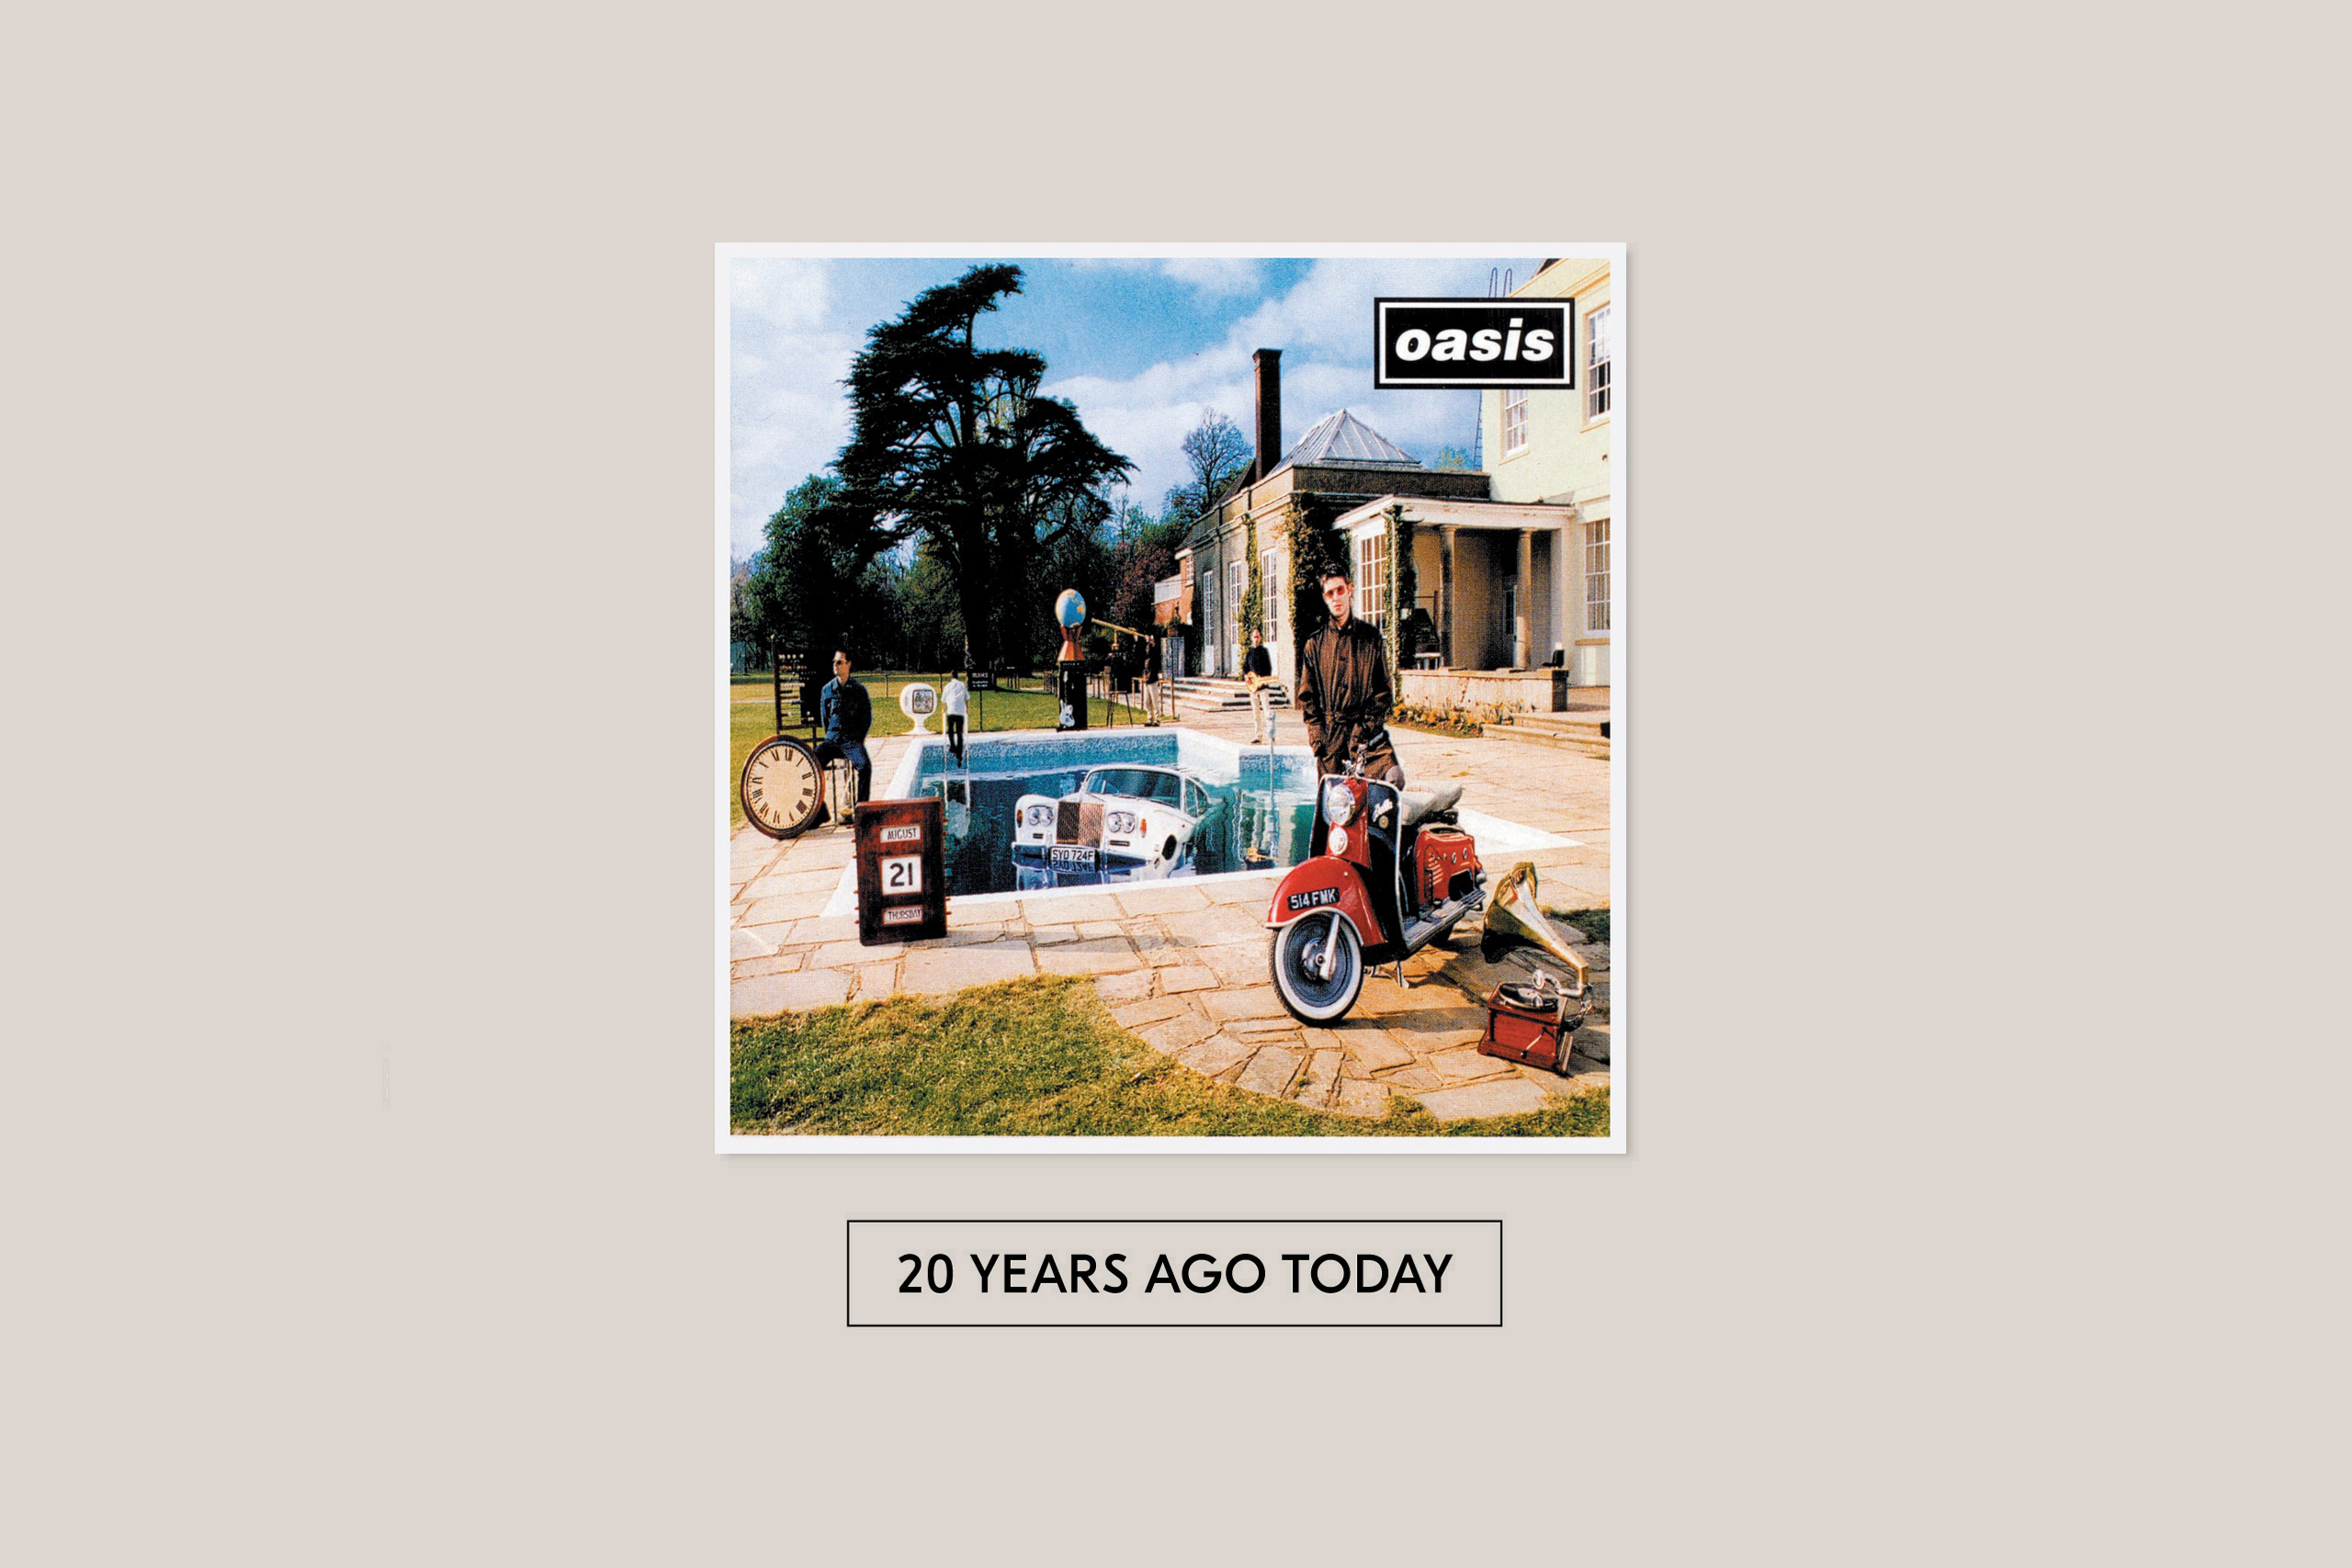 Don't just blame the cocaine for Oasis' 'Be Here Now' – it was